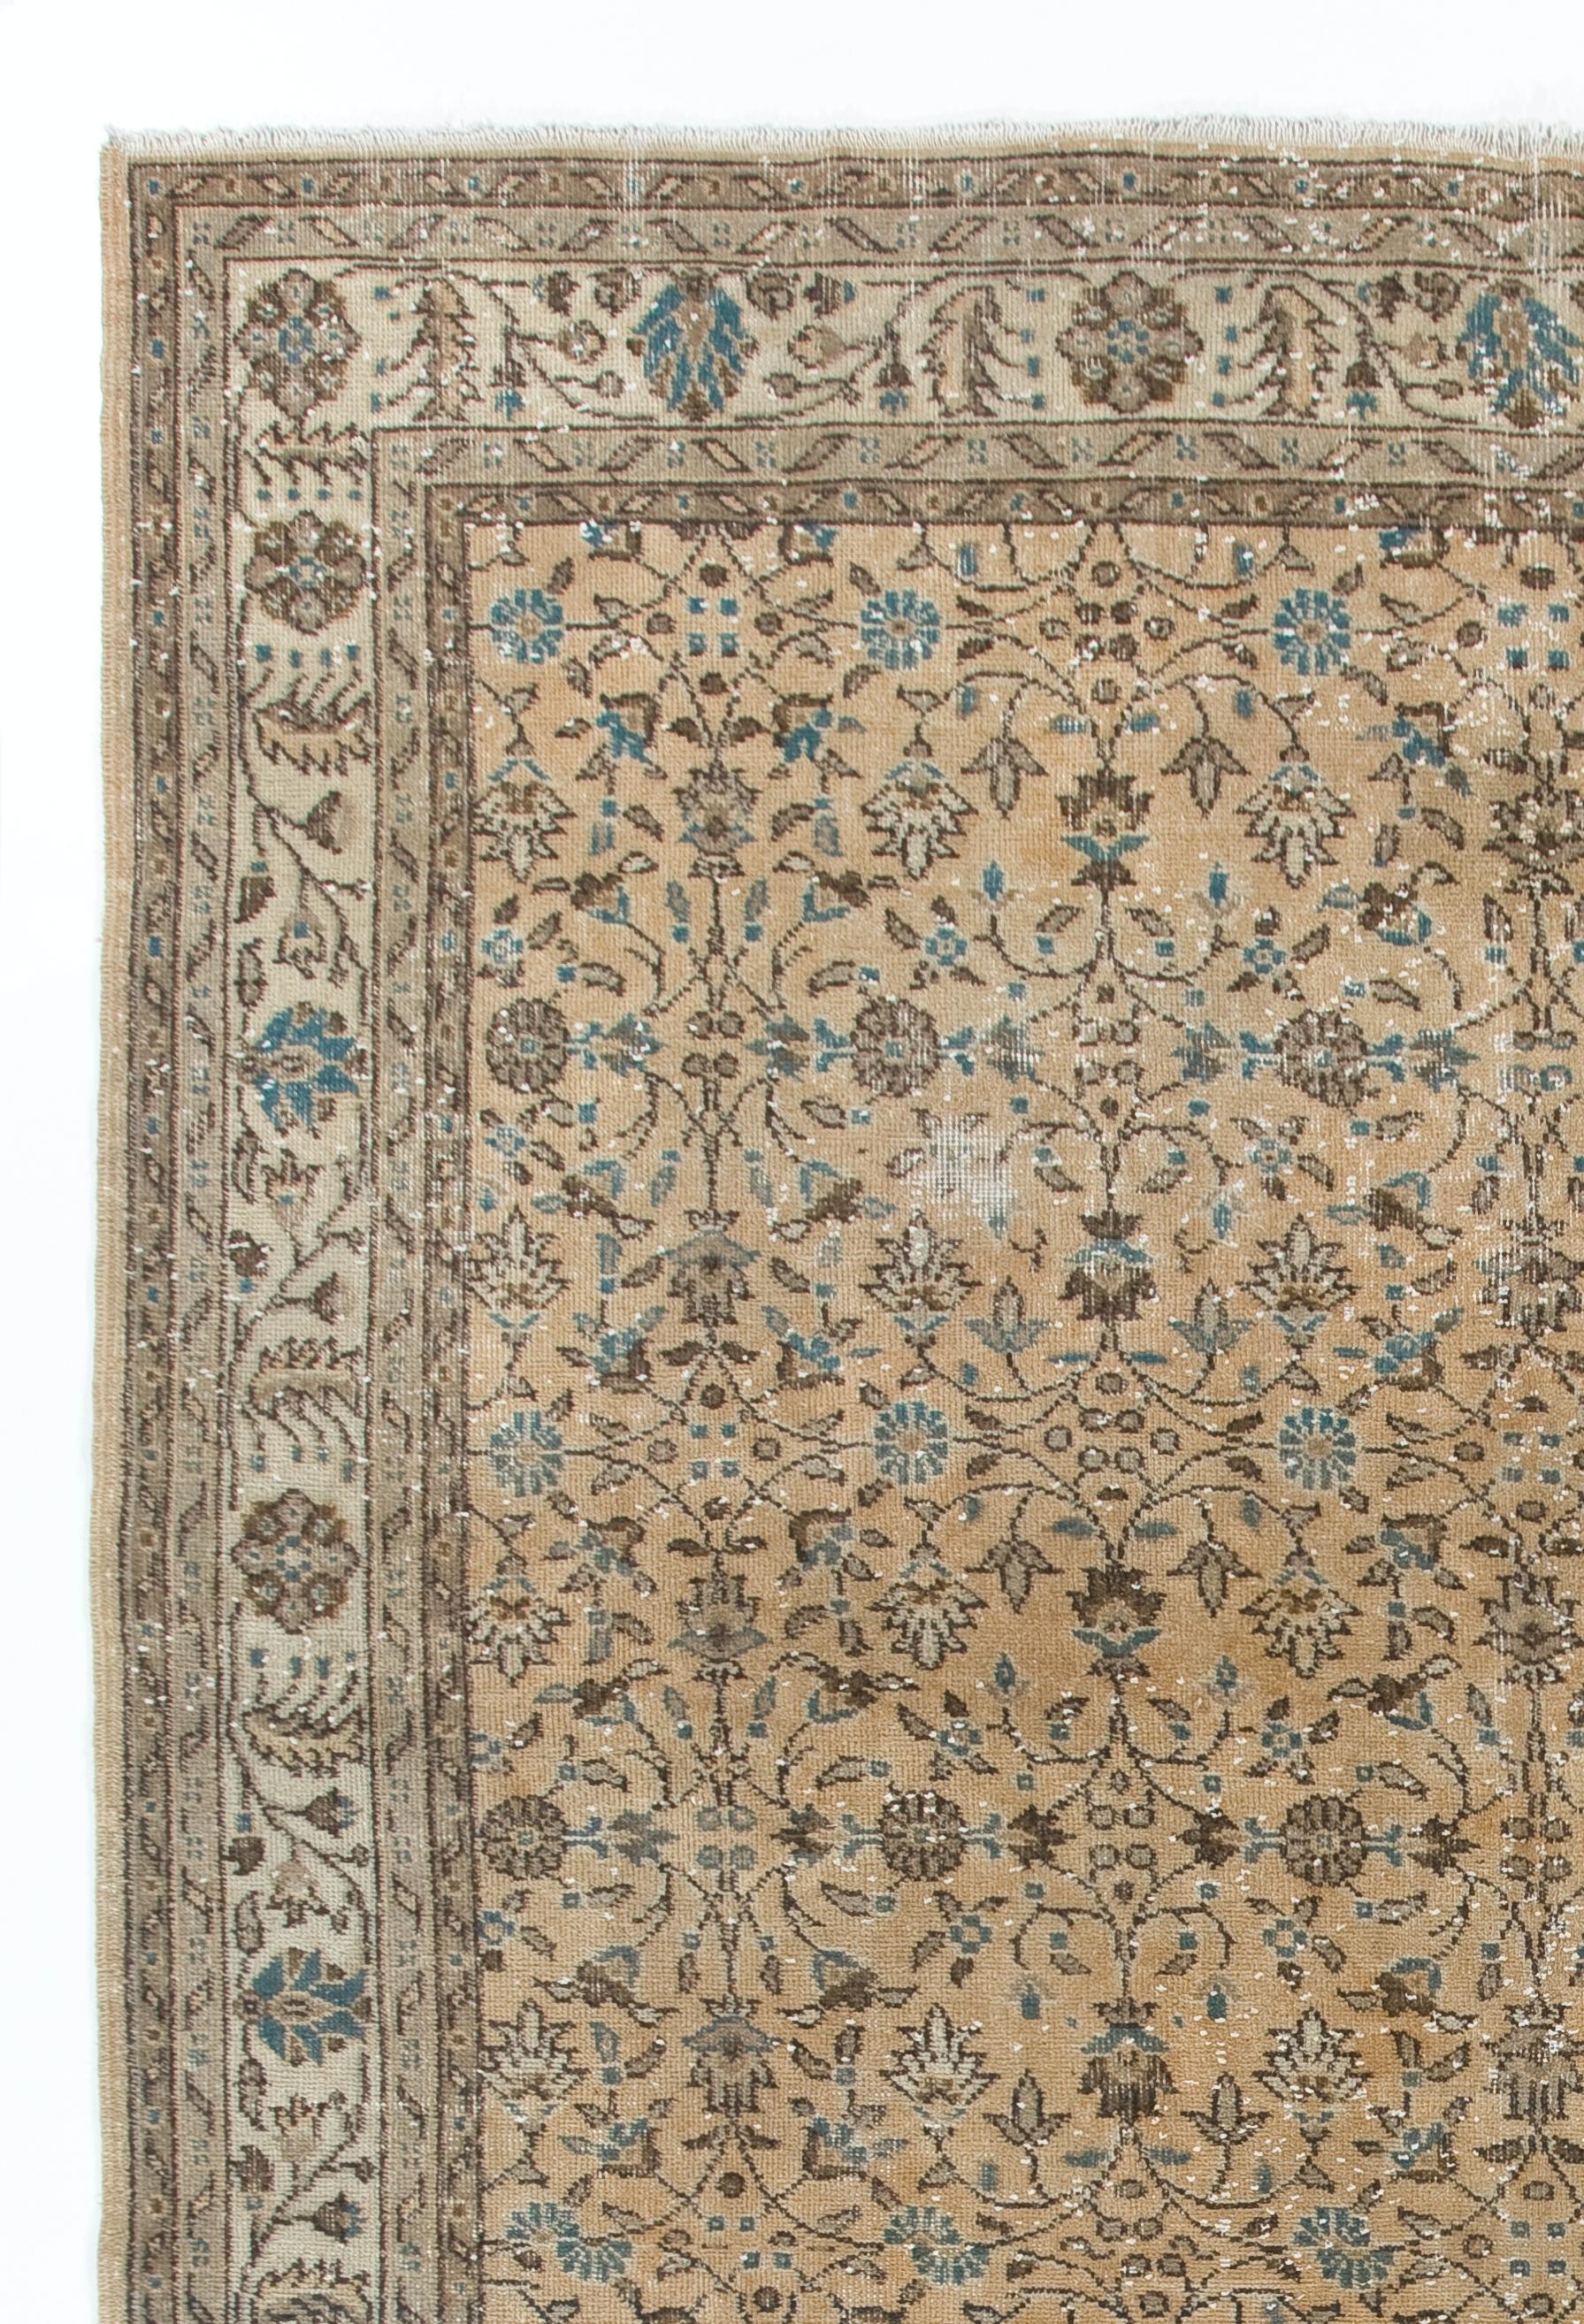 A finely hand-knotted vintage Turkish rug from 1960s featuring an all-over floral design.

The rug has even low wool pile on cotton foundation. It is heavy and lays flat on the floor. It is professionally washed, in very good condition with no